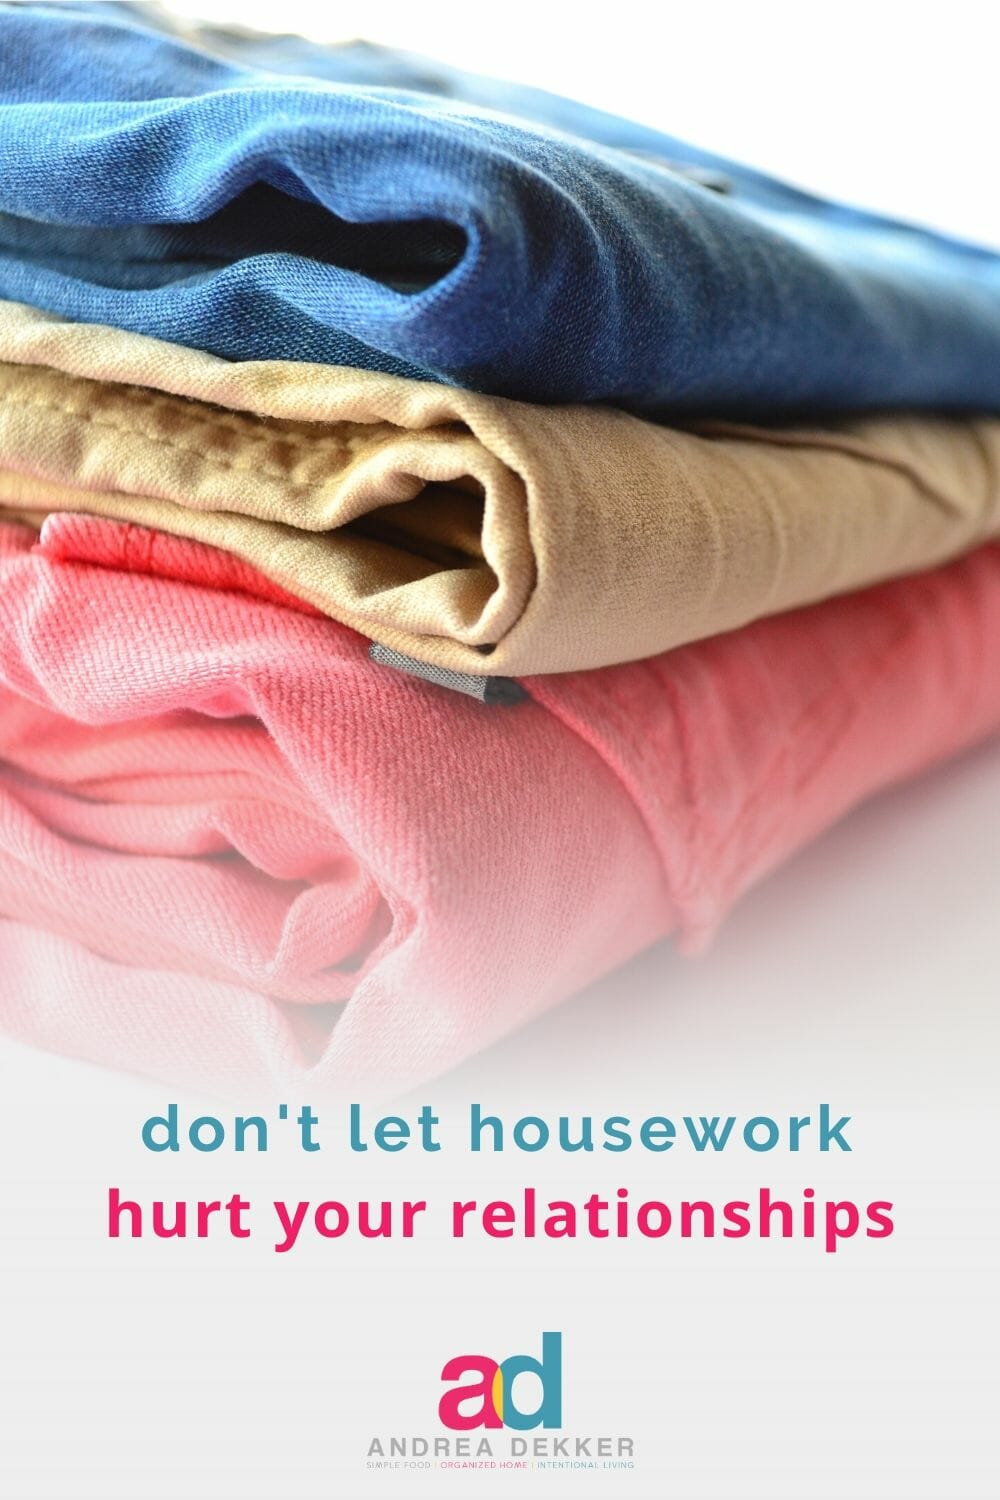 It’s normal to feel frustrated, even angry, when you don’t get the help you want around the house… but it doesn’t need to hurt your relationships. via @andreadekker